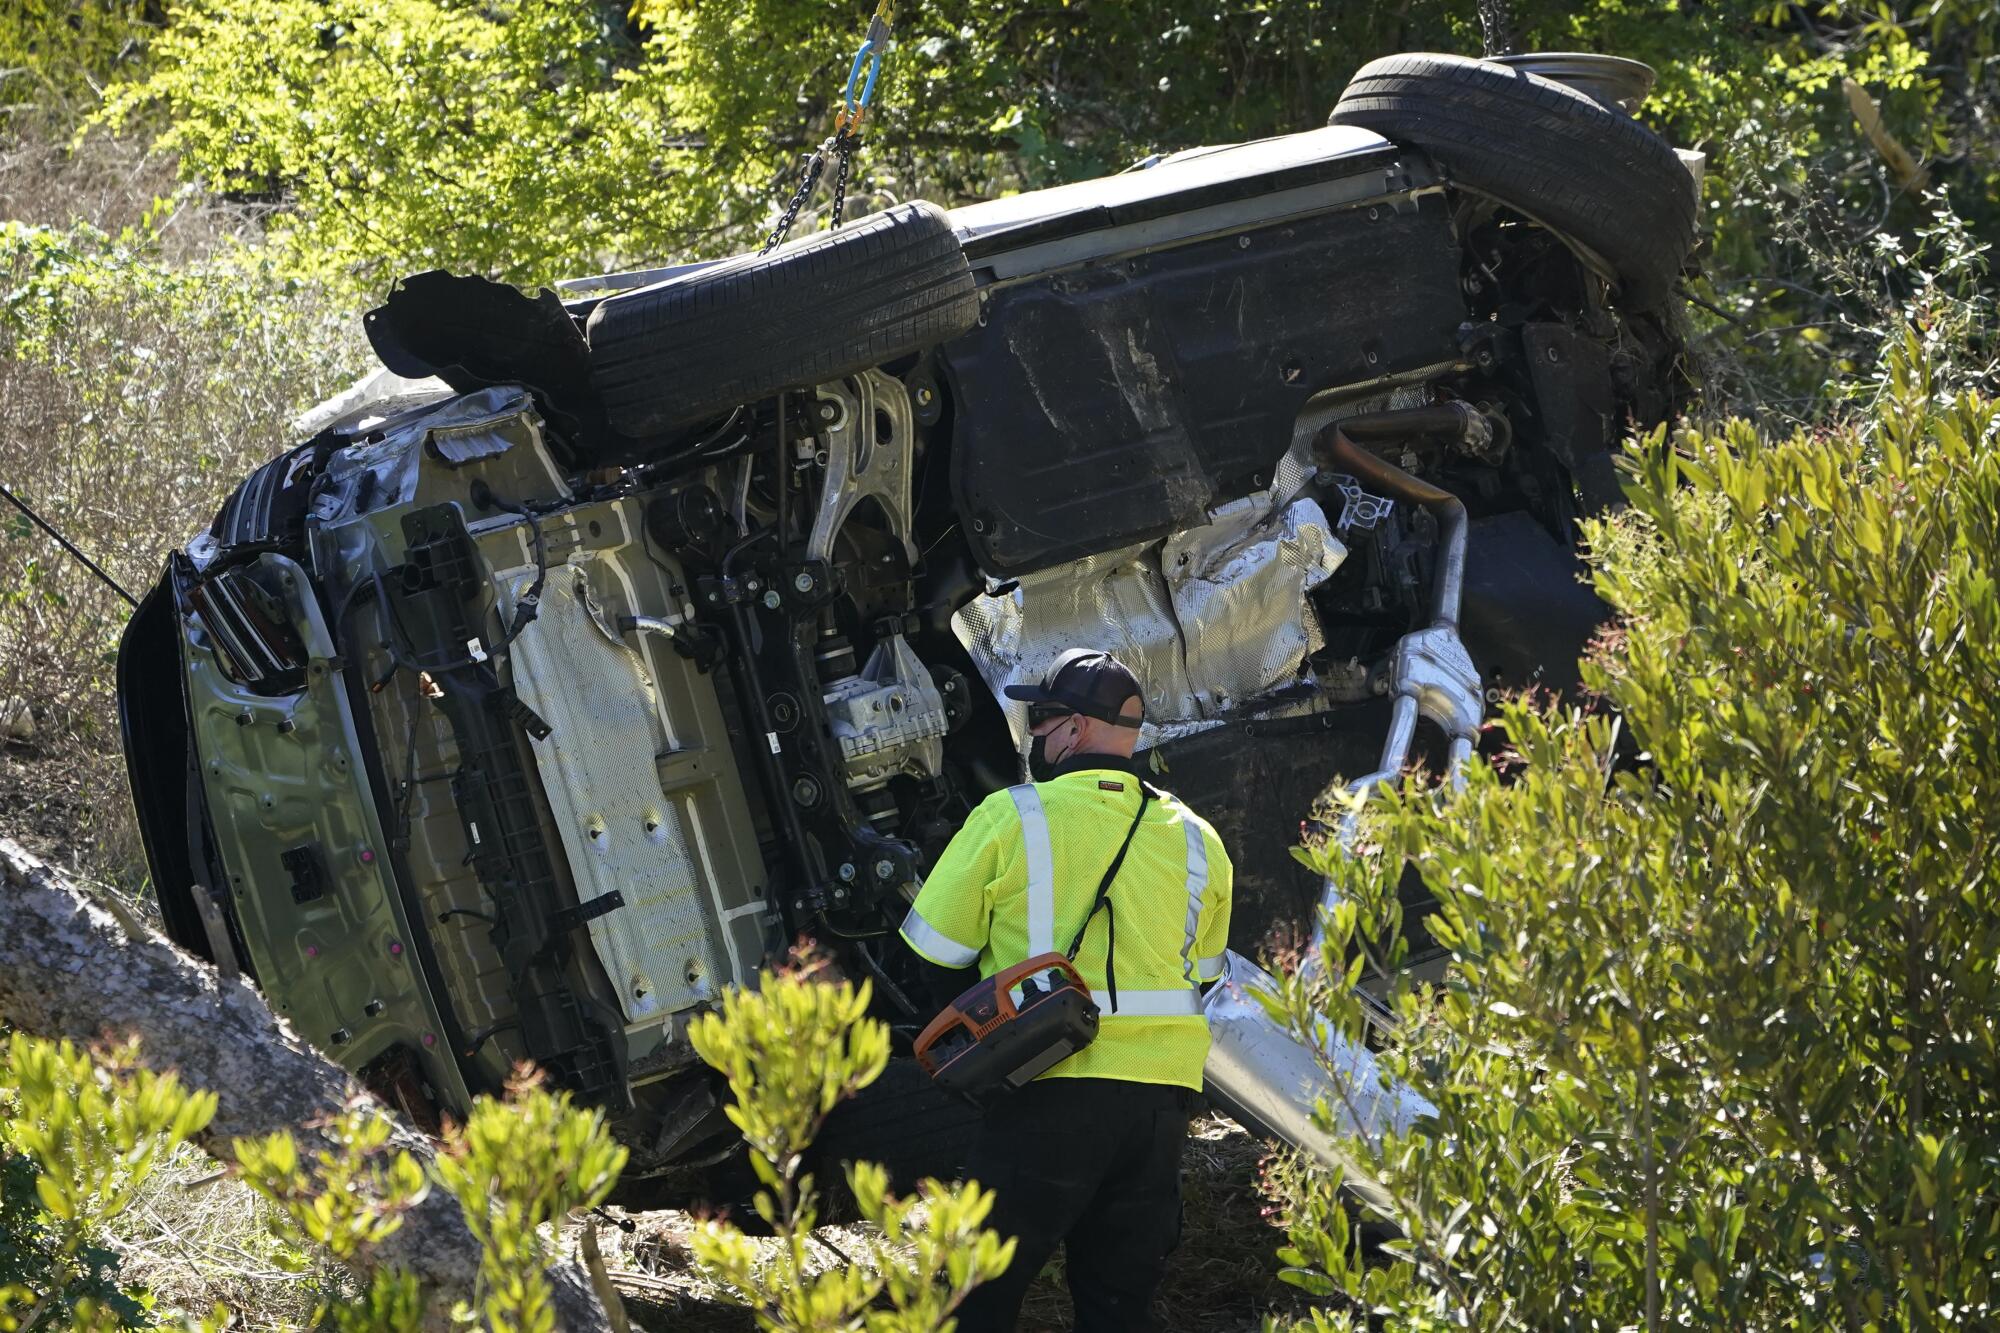 The vehicle rests on its side after a rollover accident involving golfer Tiger Woods in Rancho Palos Verdes.